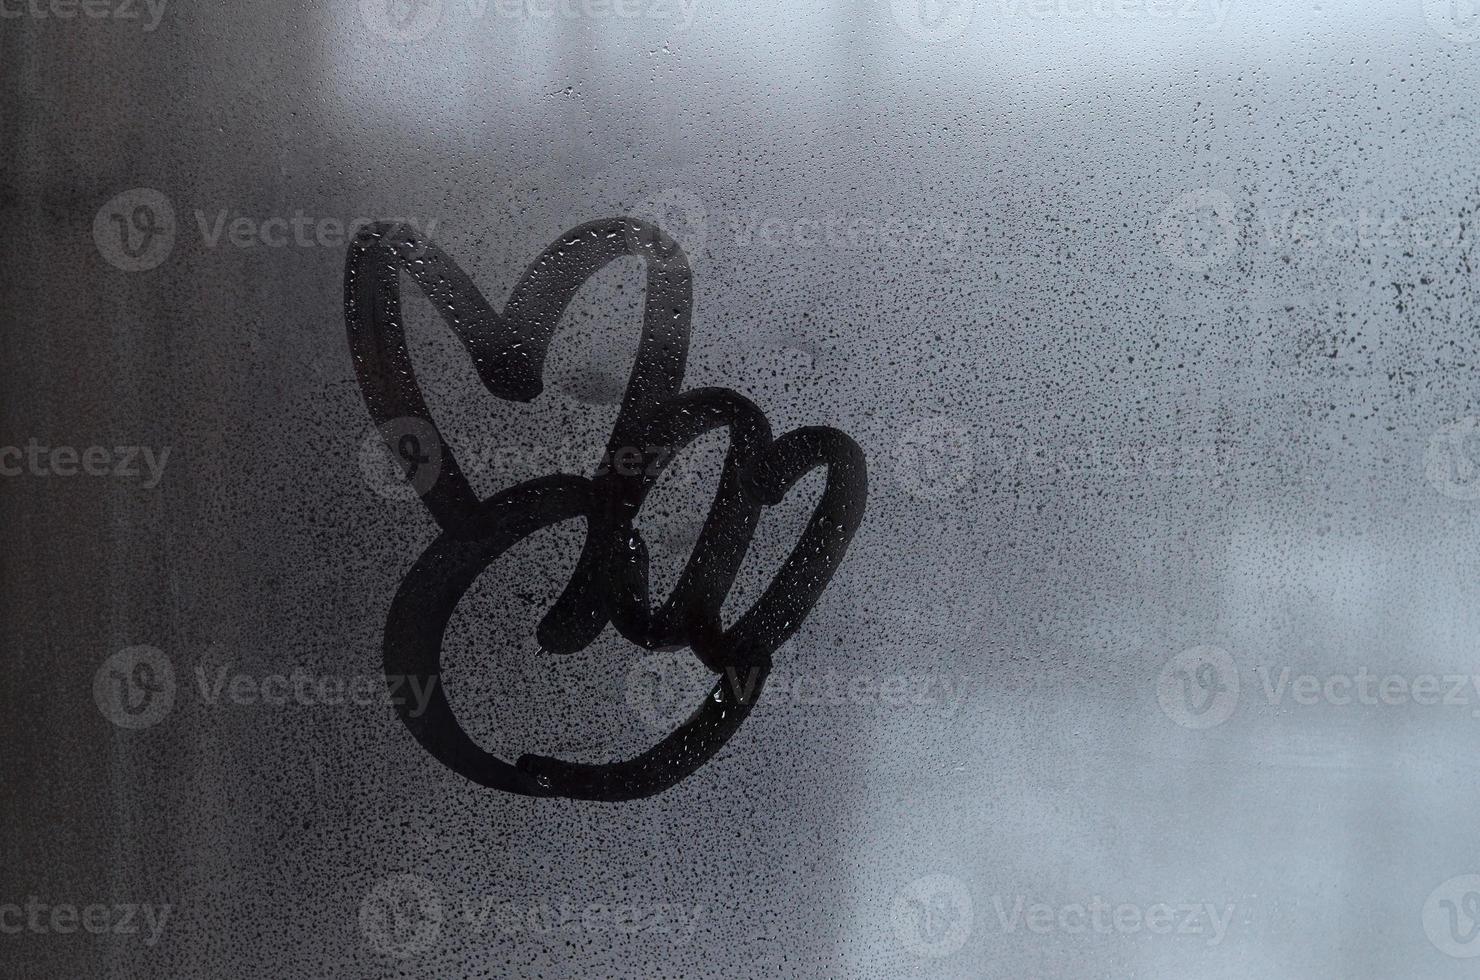 The image of the peace symbol is drawn with a finger on the surface of a misted glass window. Combination of two fingers photo